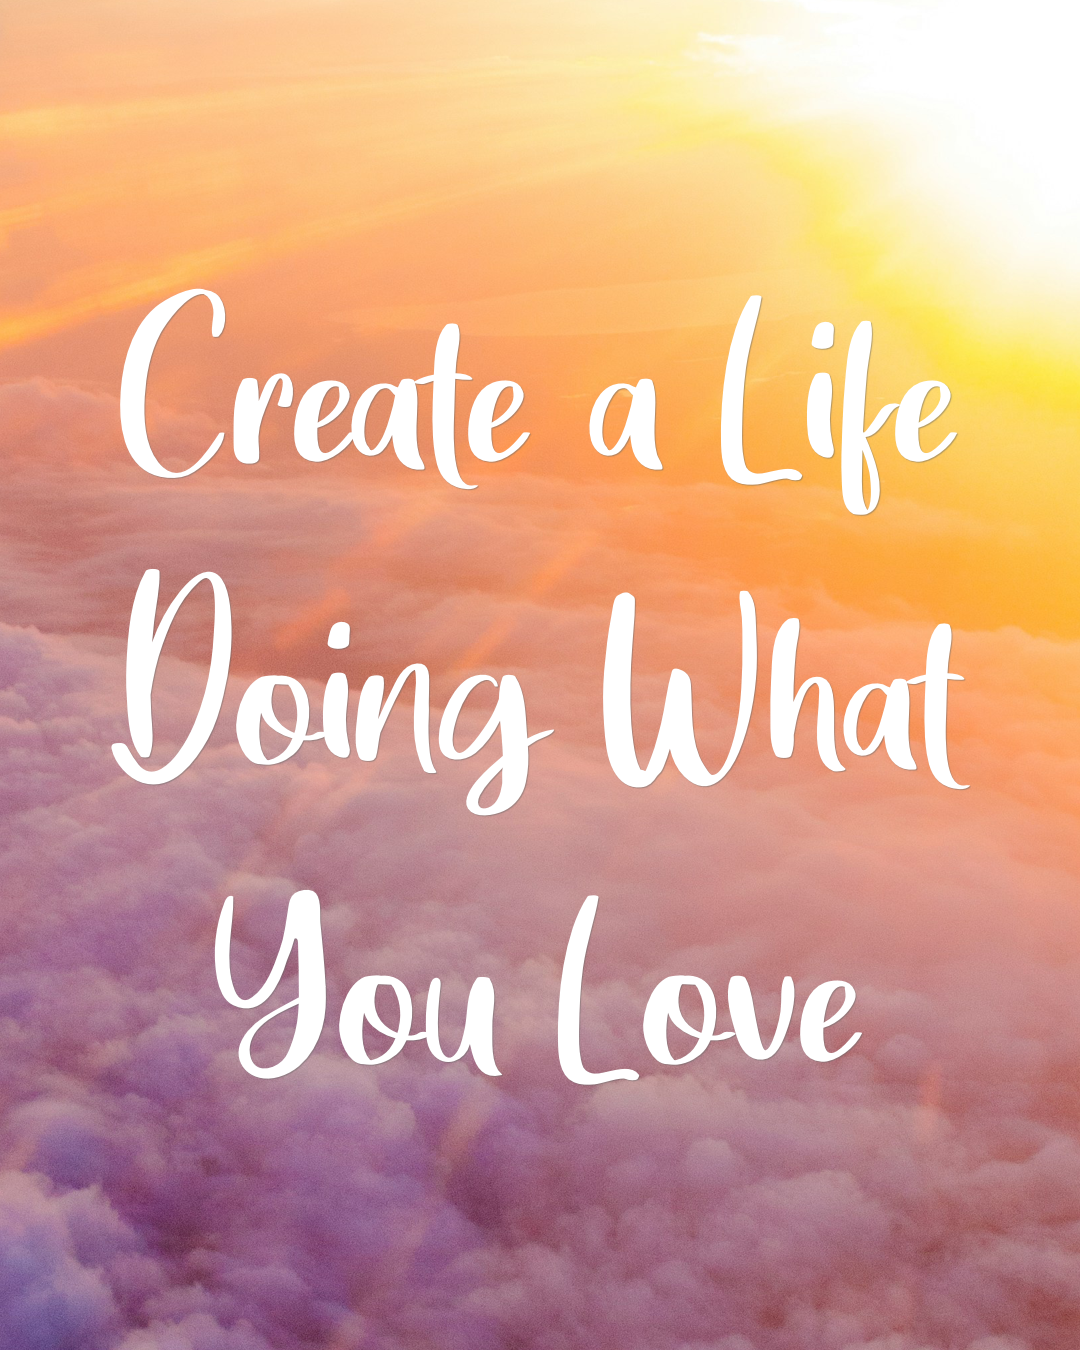 Create a Life Doing What You Love ~ COURSE + ENERGETIC ALCHEMY